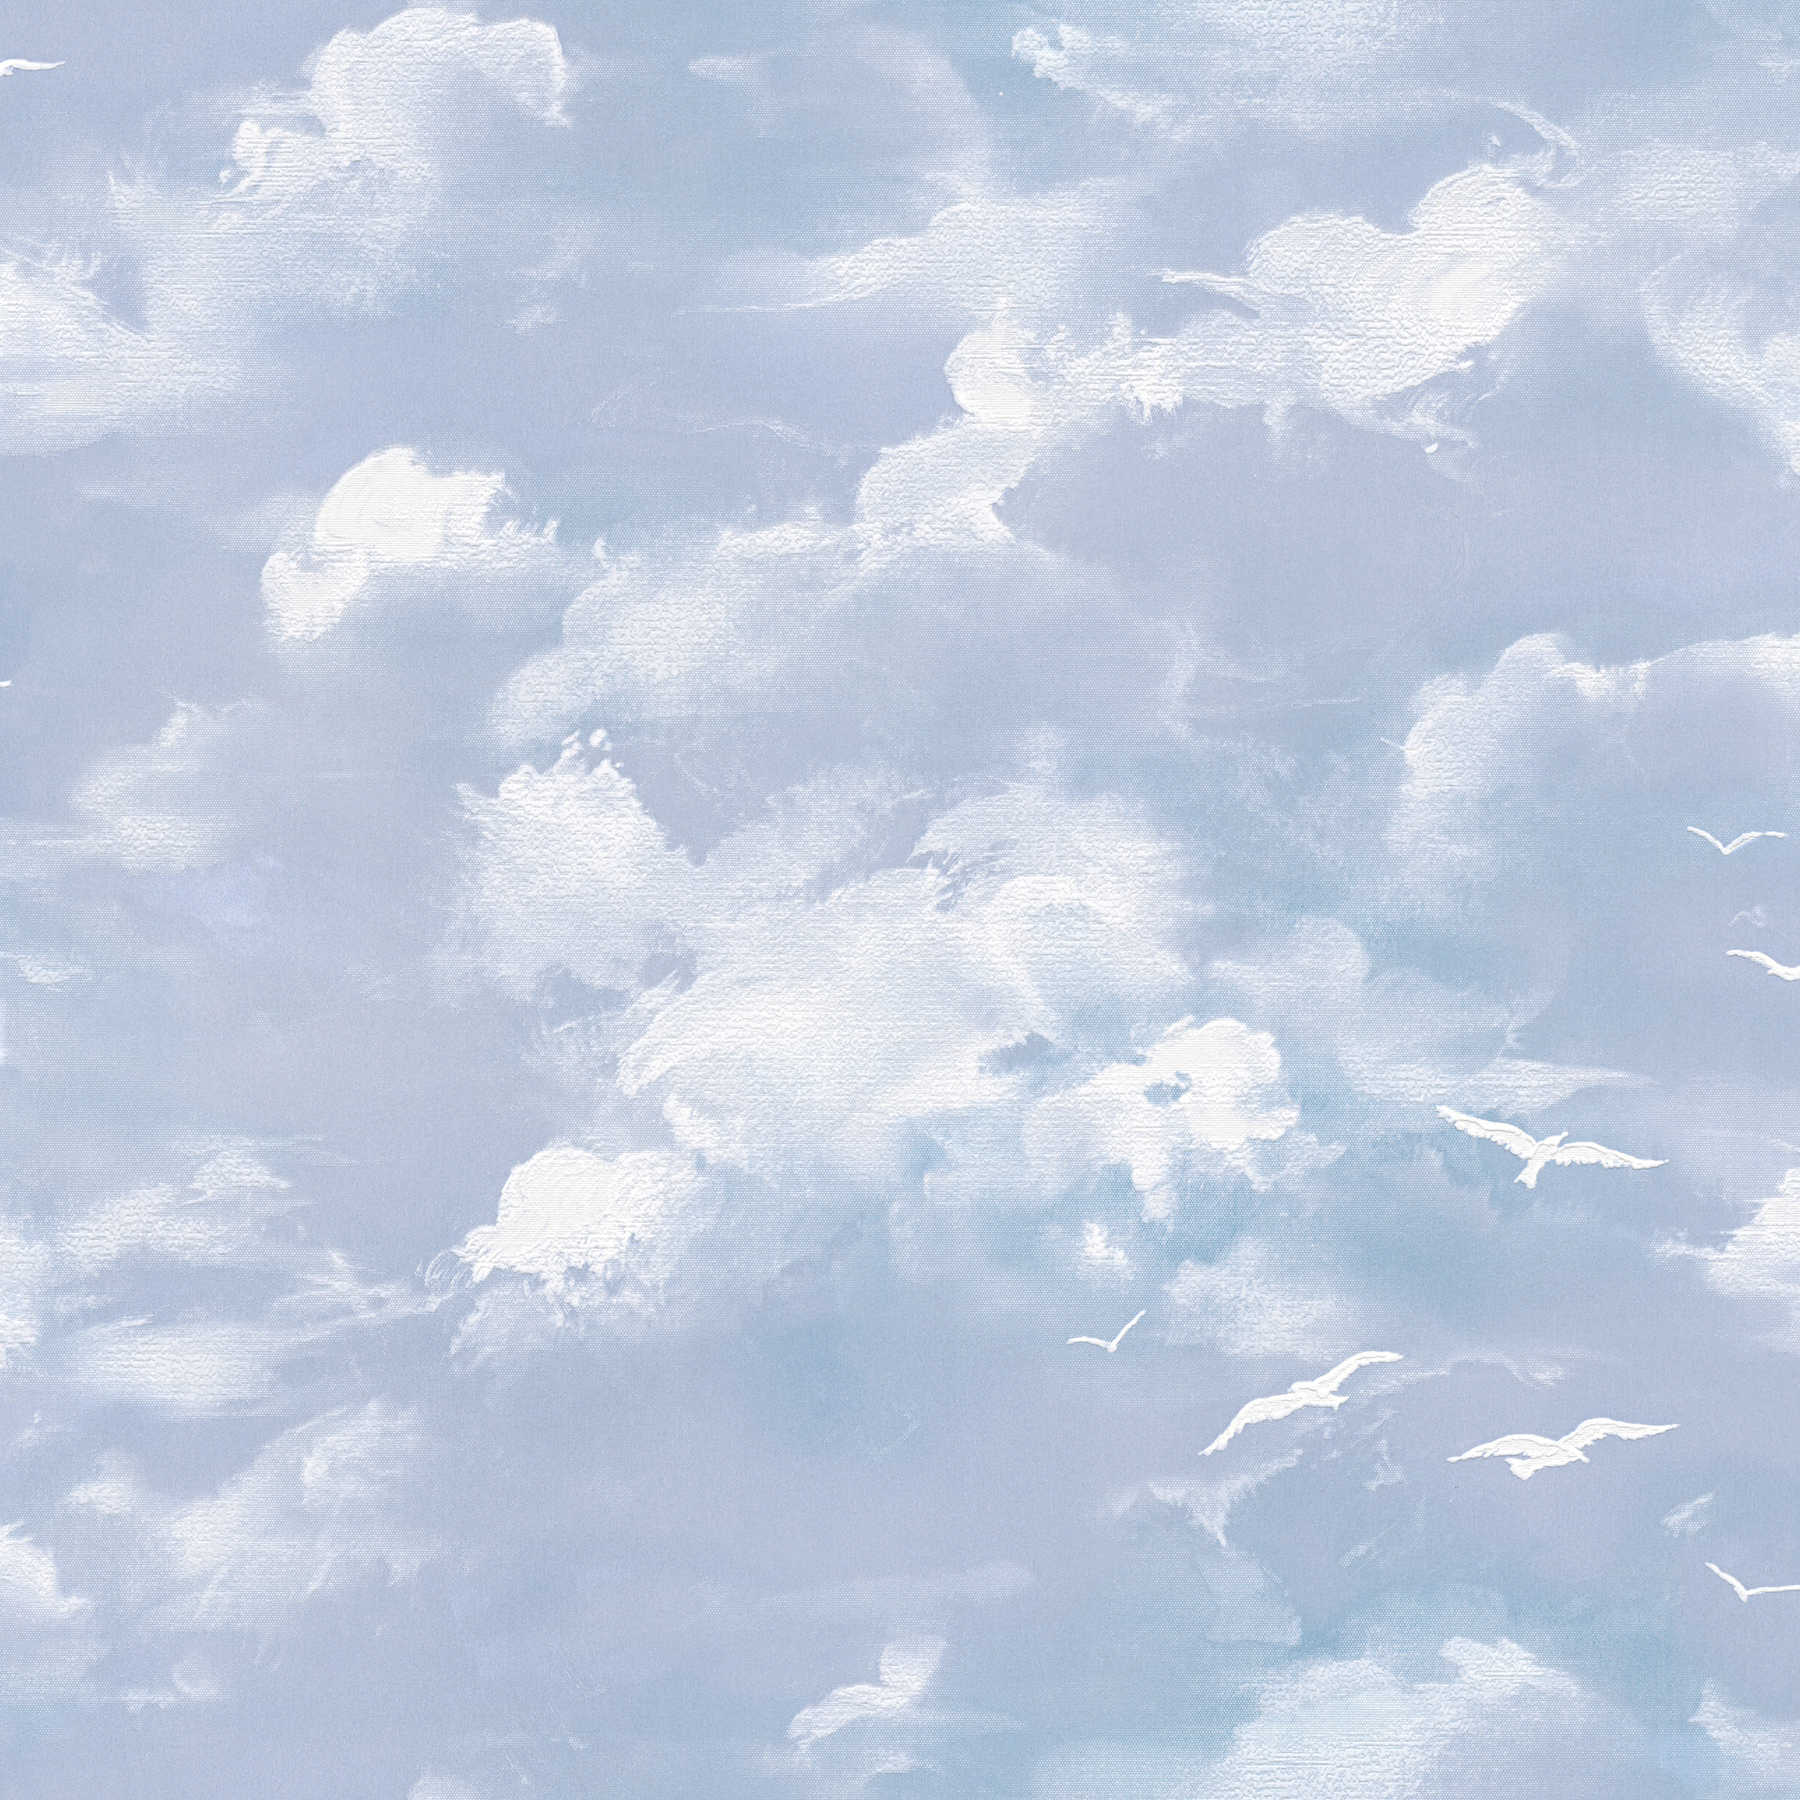         Clouds Wallpaper with natural pattern - blue, white
    